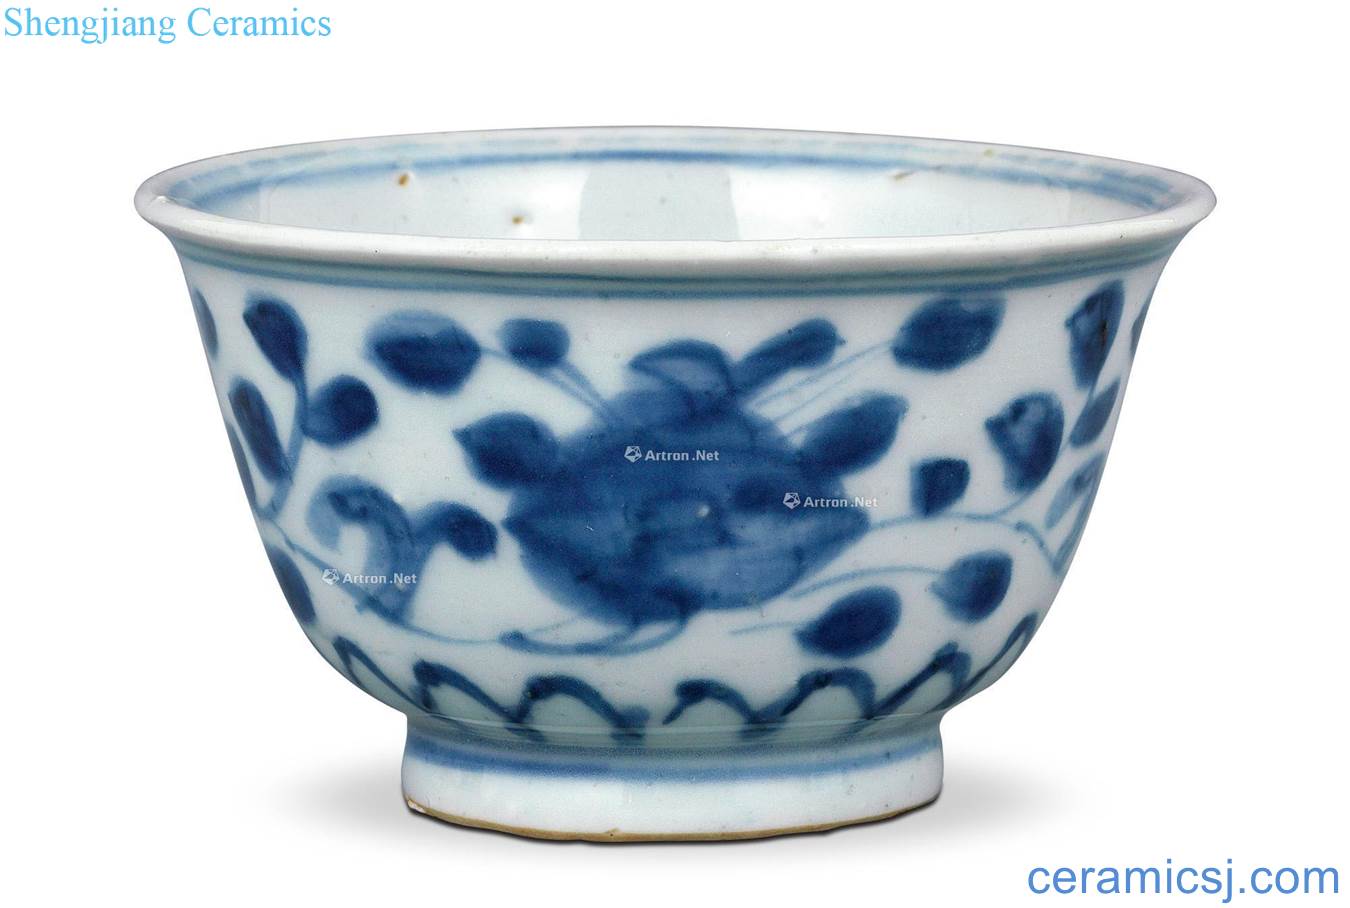 The late Ming dynasty porcelain cup